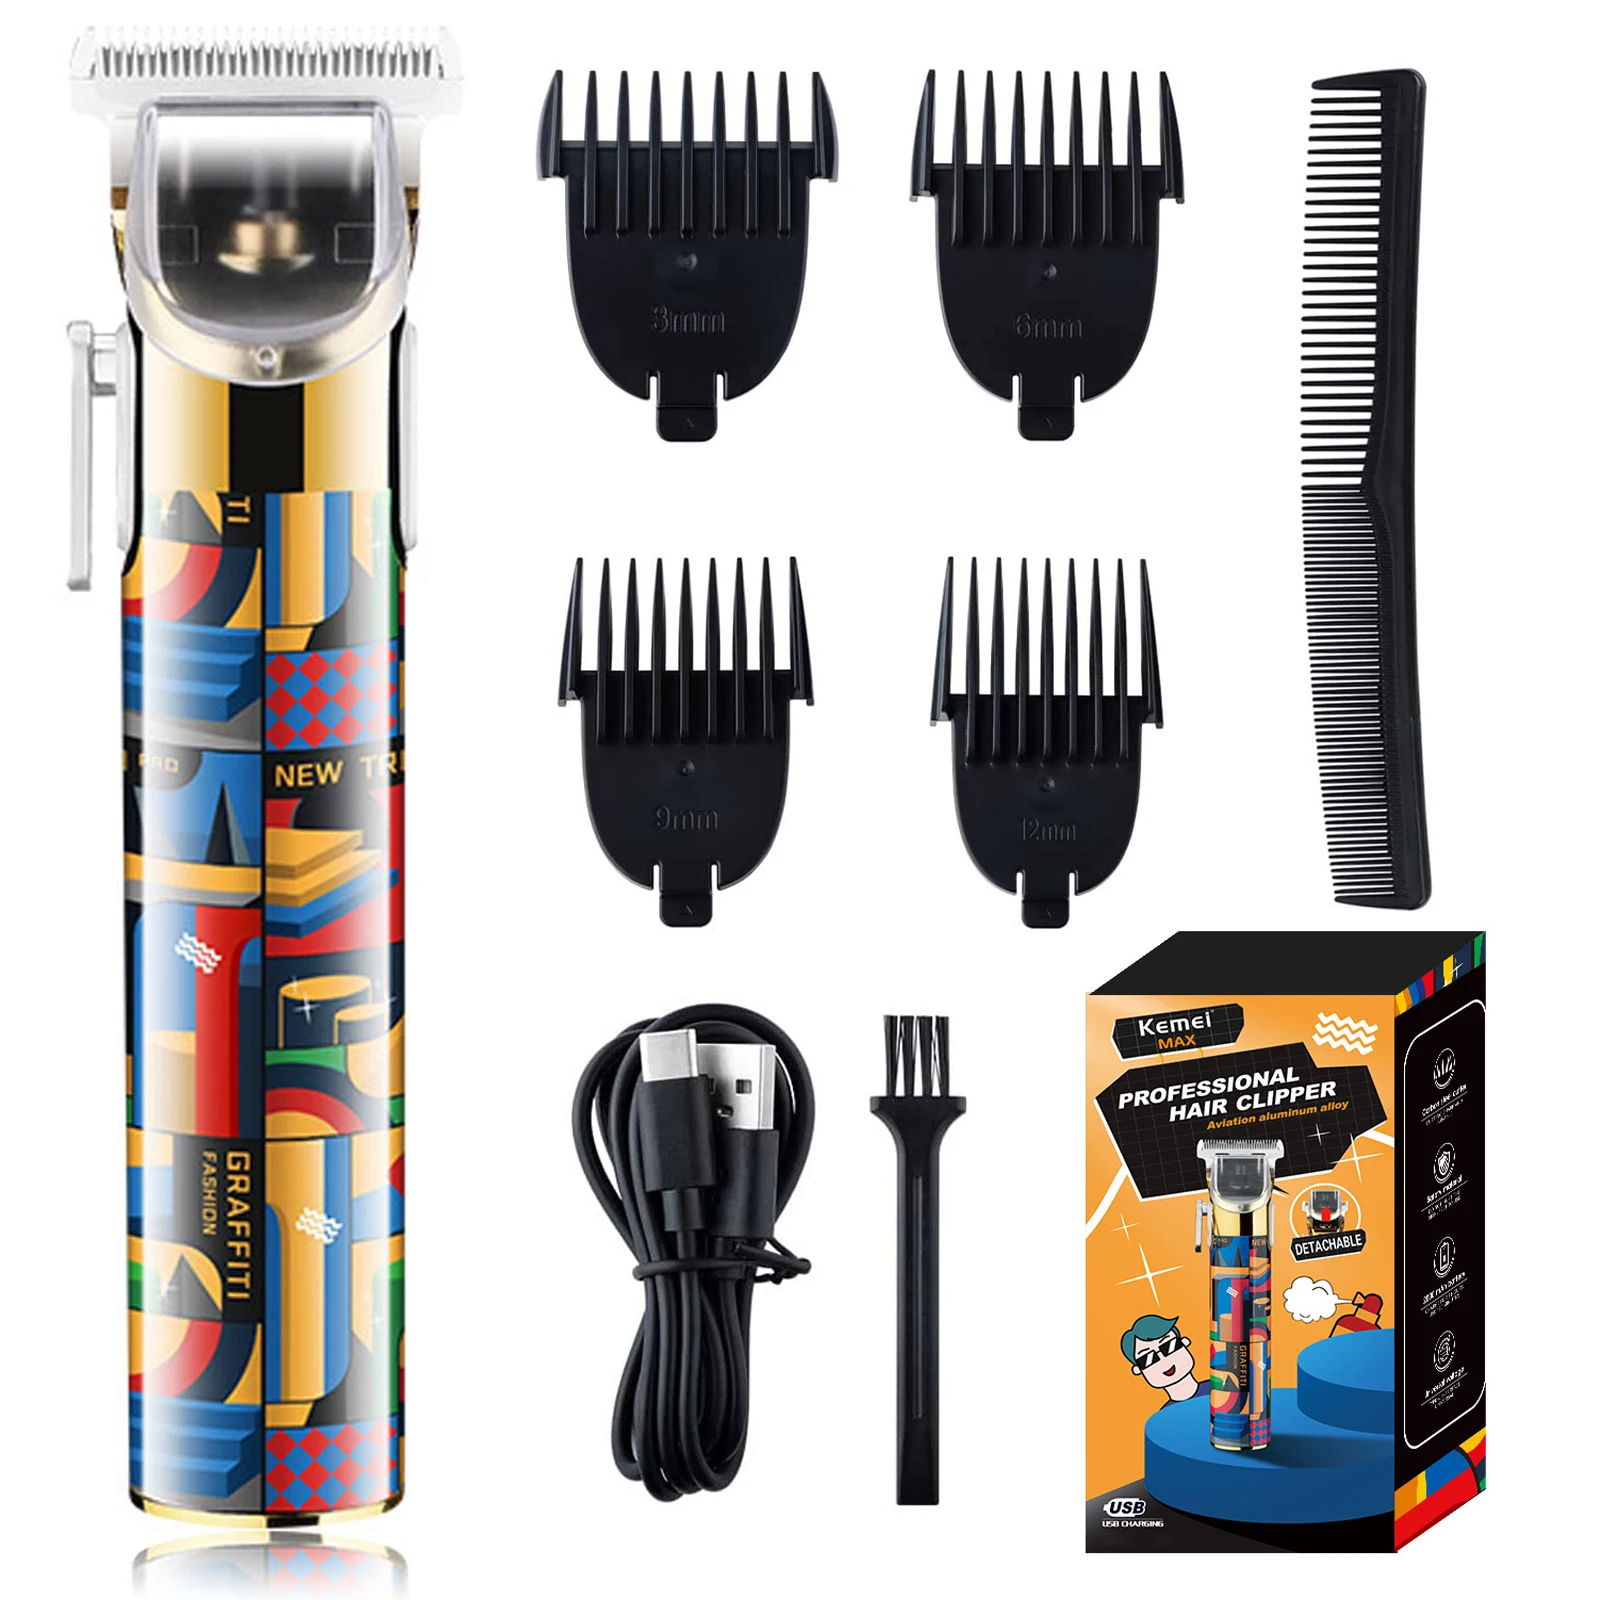 Kemei Electric Hair Trimmer Machine Professional Shaver Oil Head Hair Clipper Rechargeable Razor Set KM-1102H/MAX2092/MAX5087 enlarge